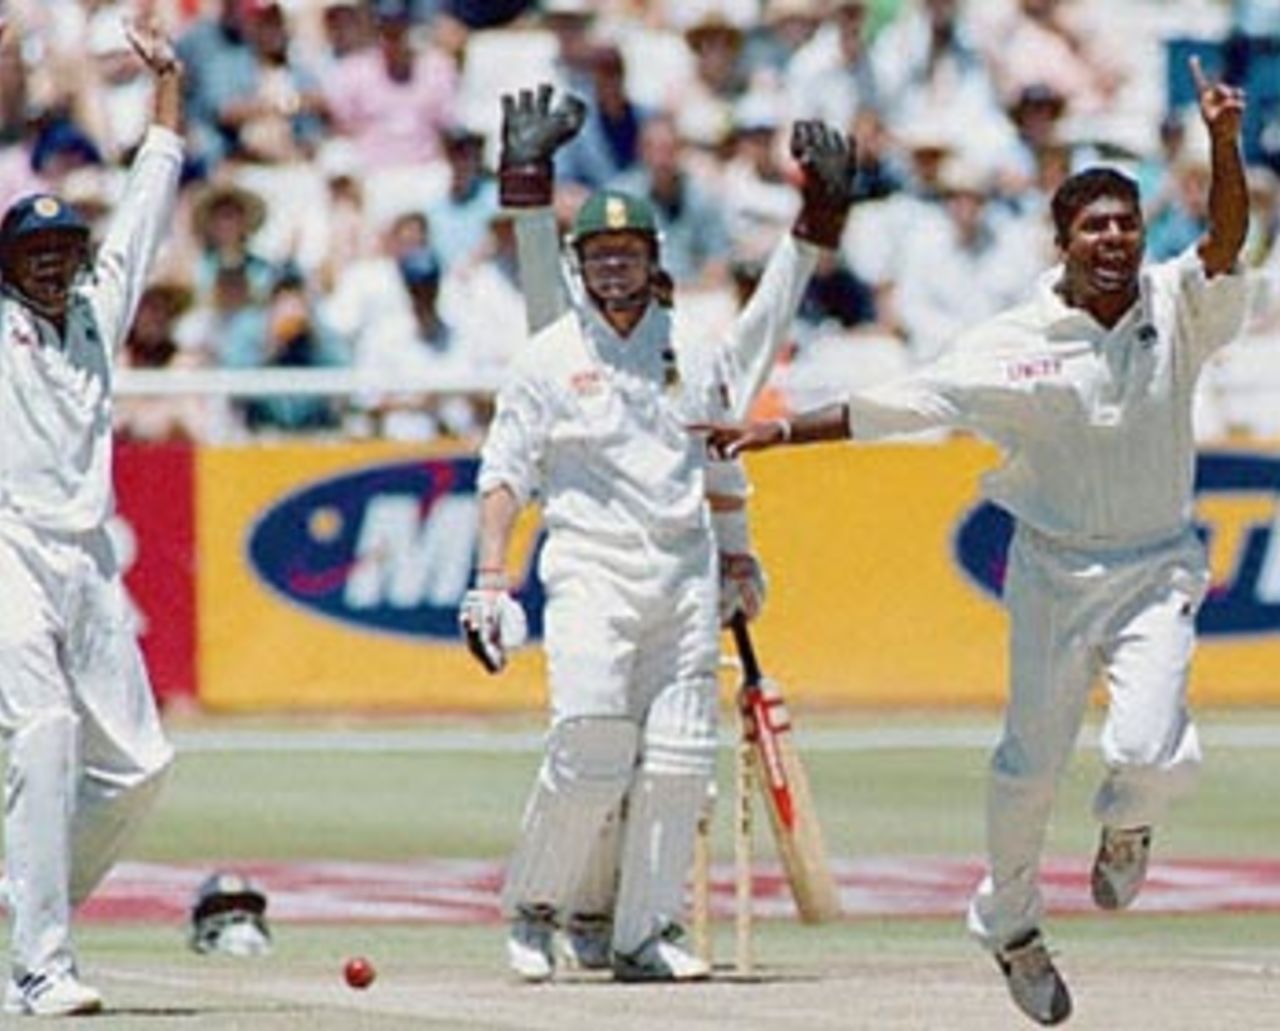 Sri Lanka's bowler Mutiah Muralitharan appeals for a LBW against South Africa's batsman Darryl Cullinan , 03 January 2001 , during the second day of the second five day cricket test between the two countries , at the Newlands cricket ground in Cape Town.